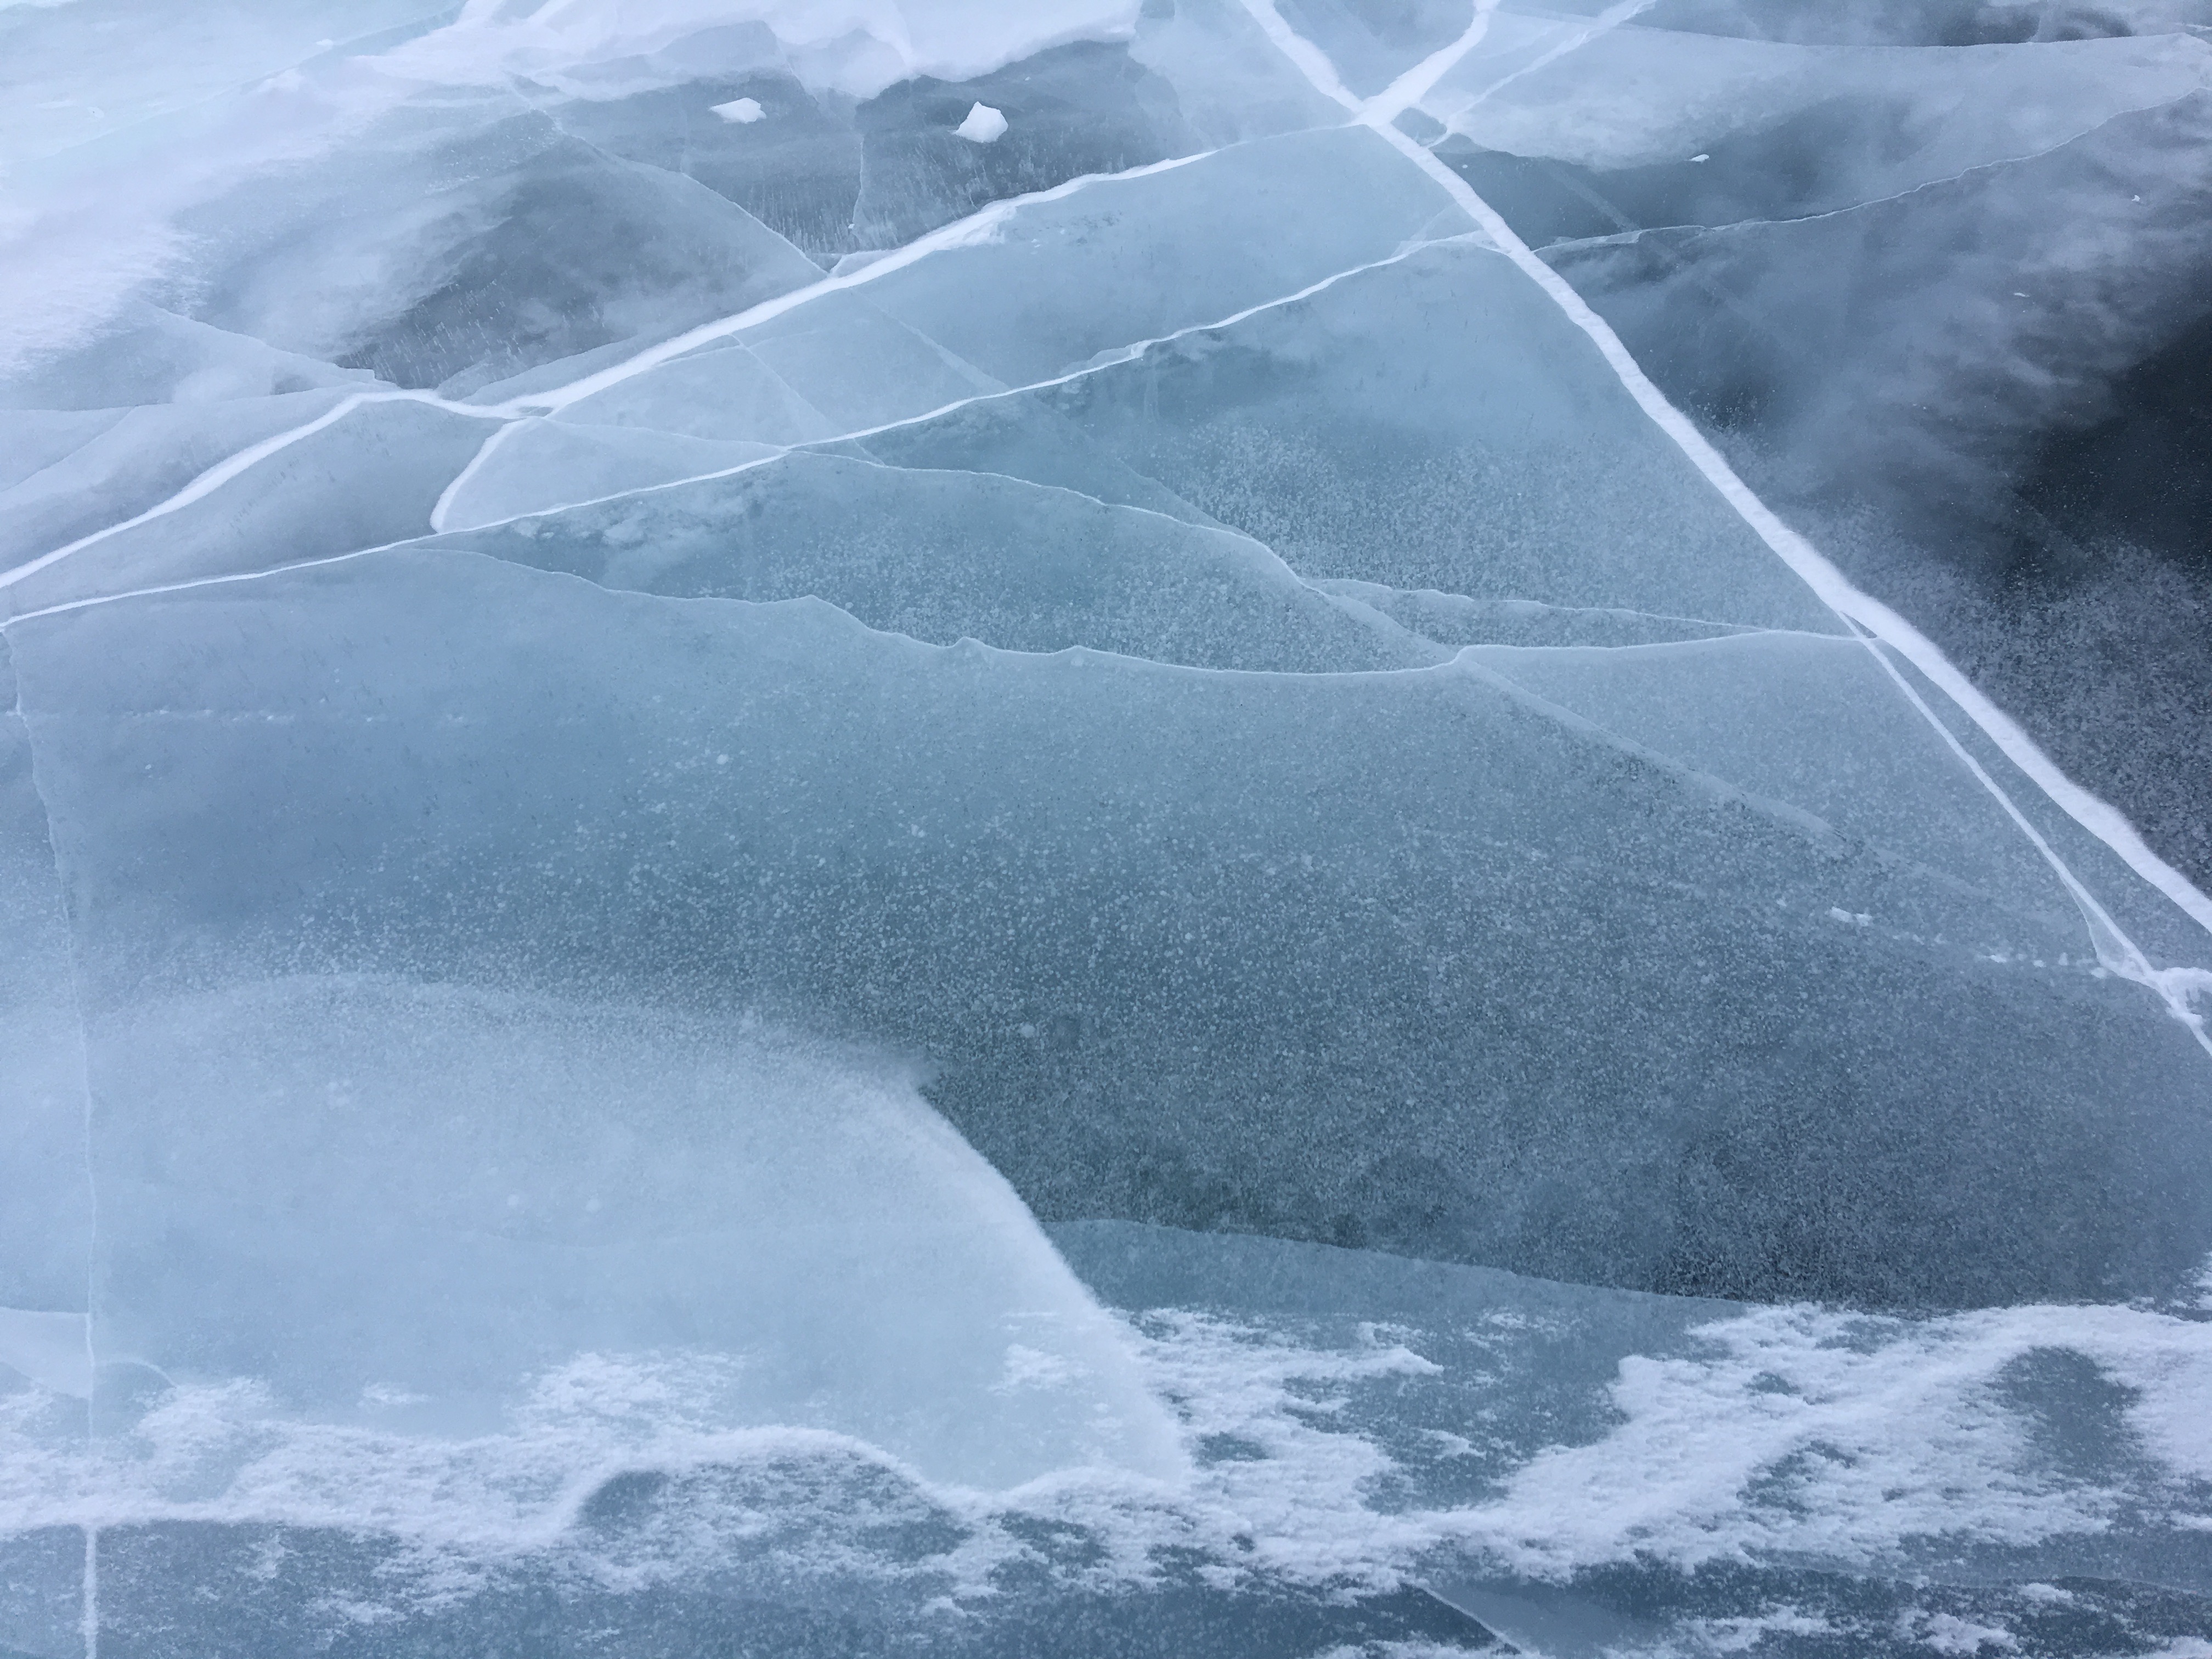 Closeup of the frozen lake, uncovered by intense wind.